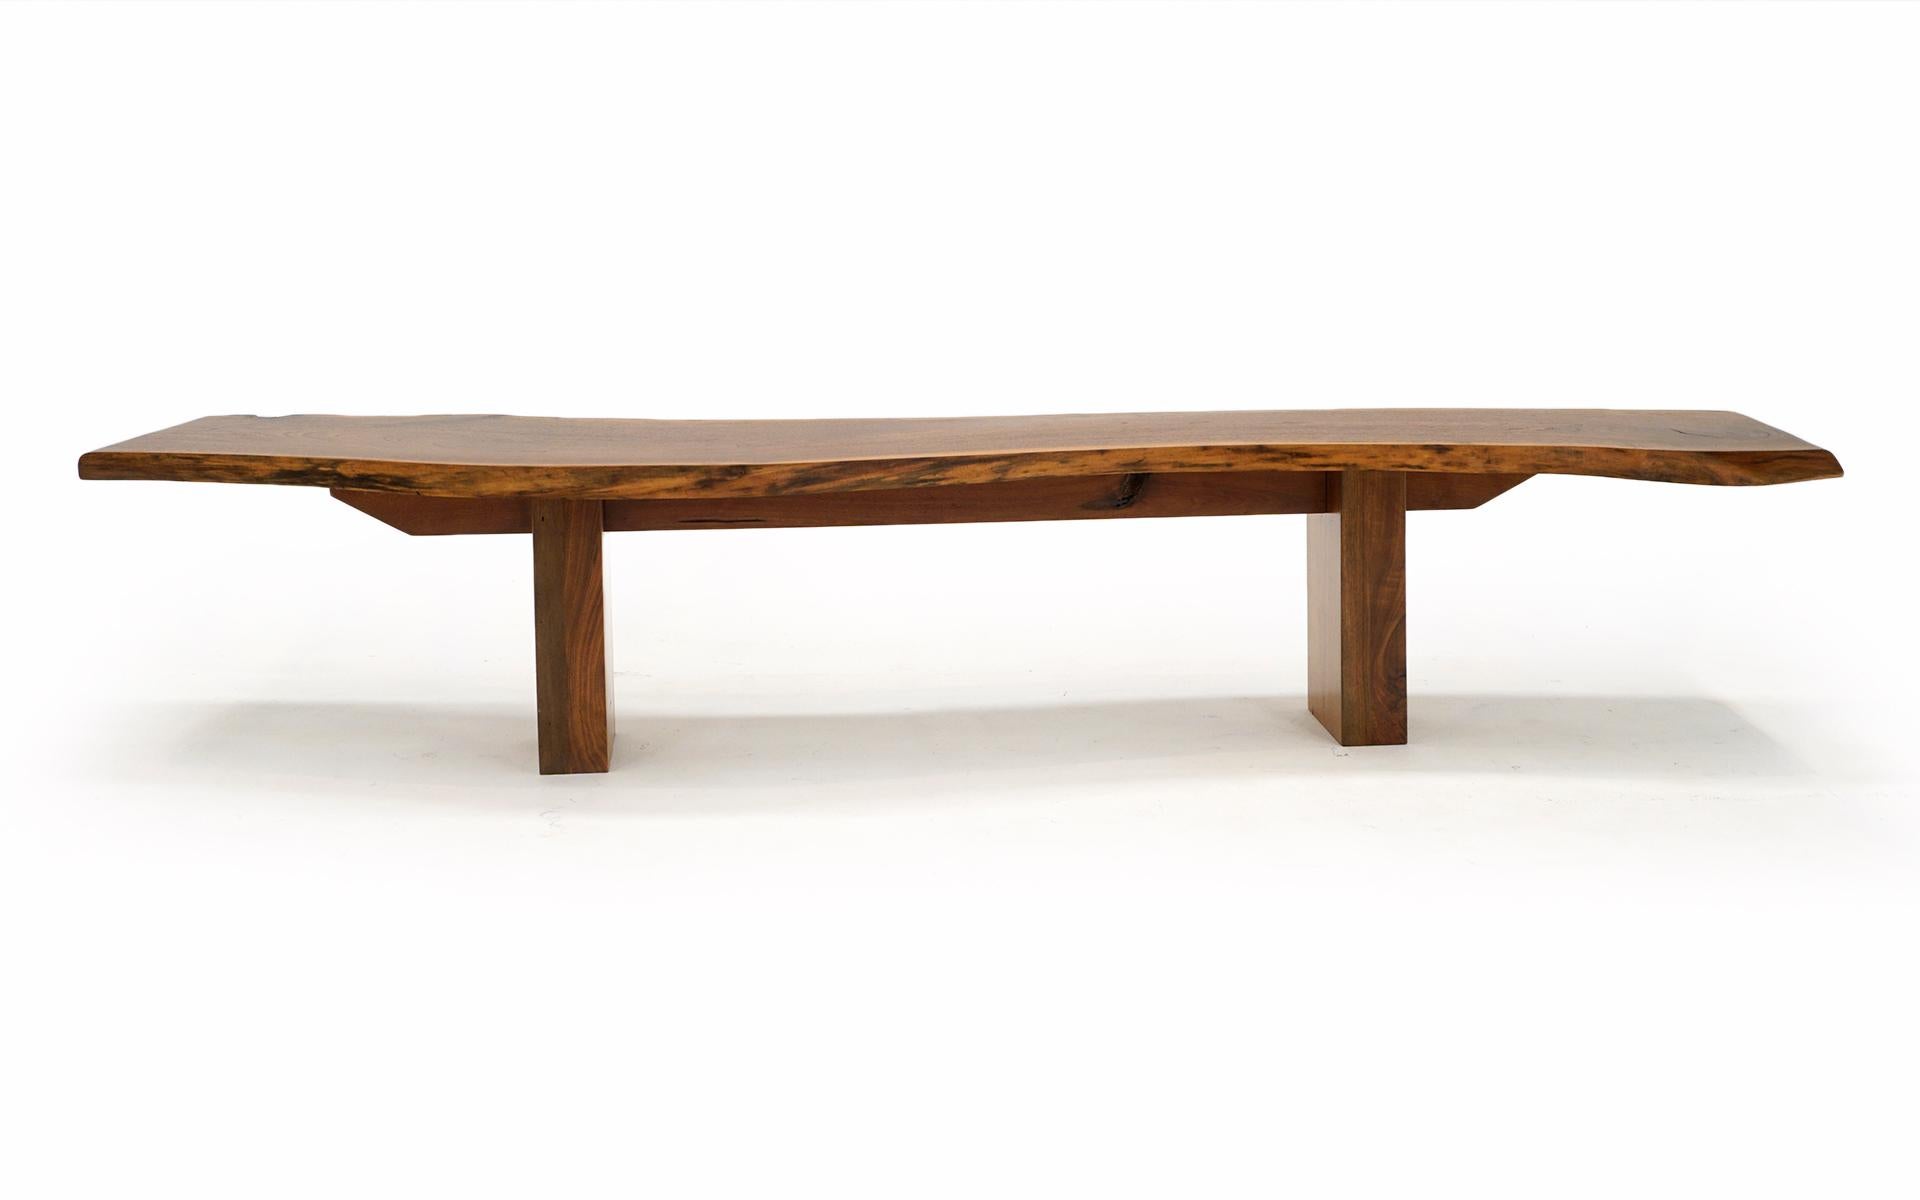 Steel Monumental Curved Bench / Coffee Table in Solid Live Edge Walnut, One of a Kind For Sale